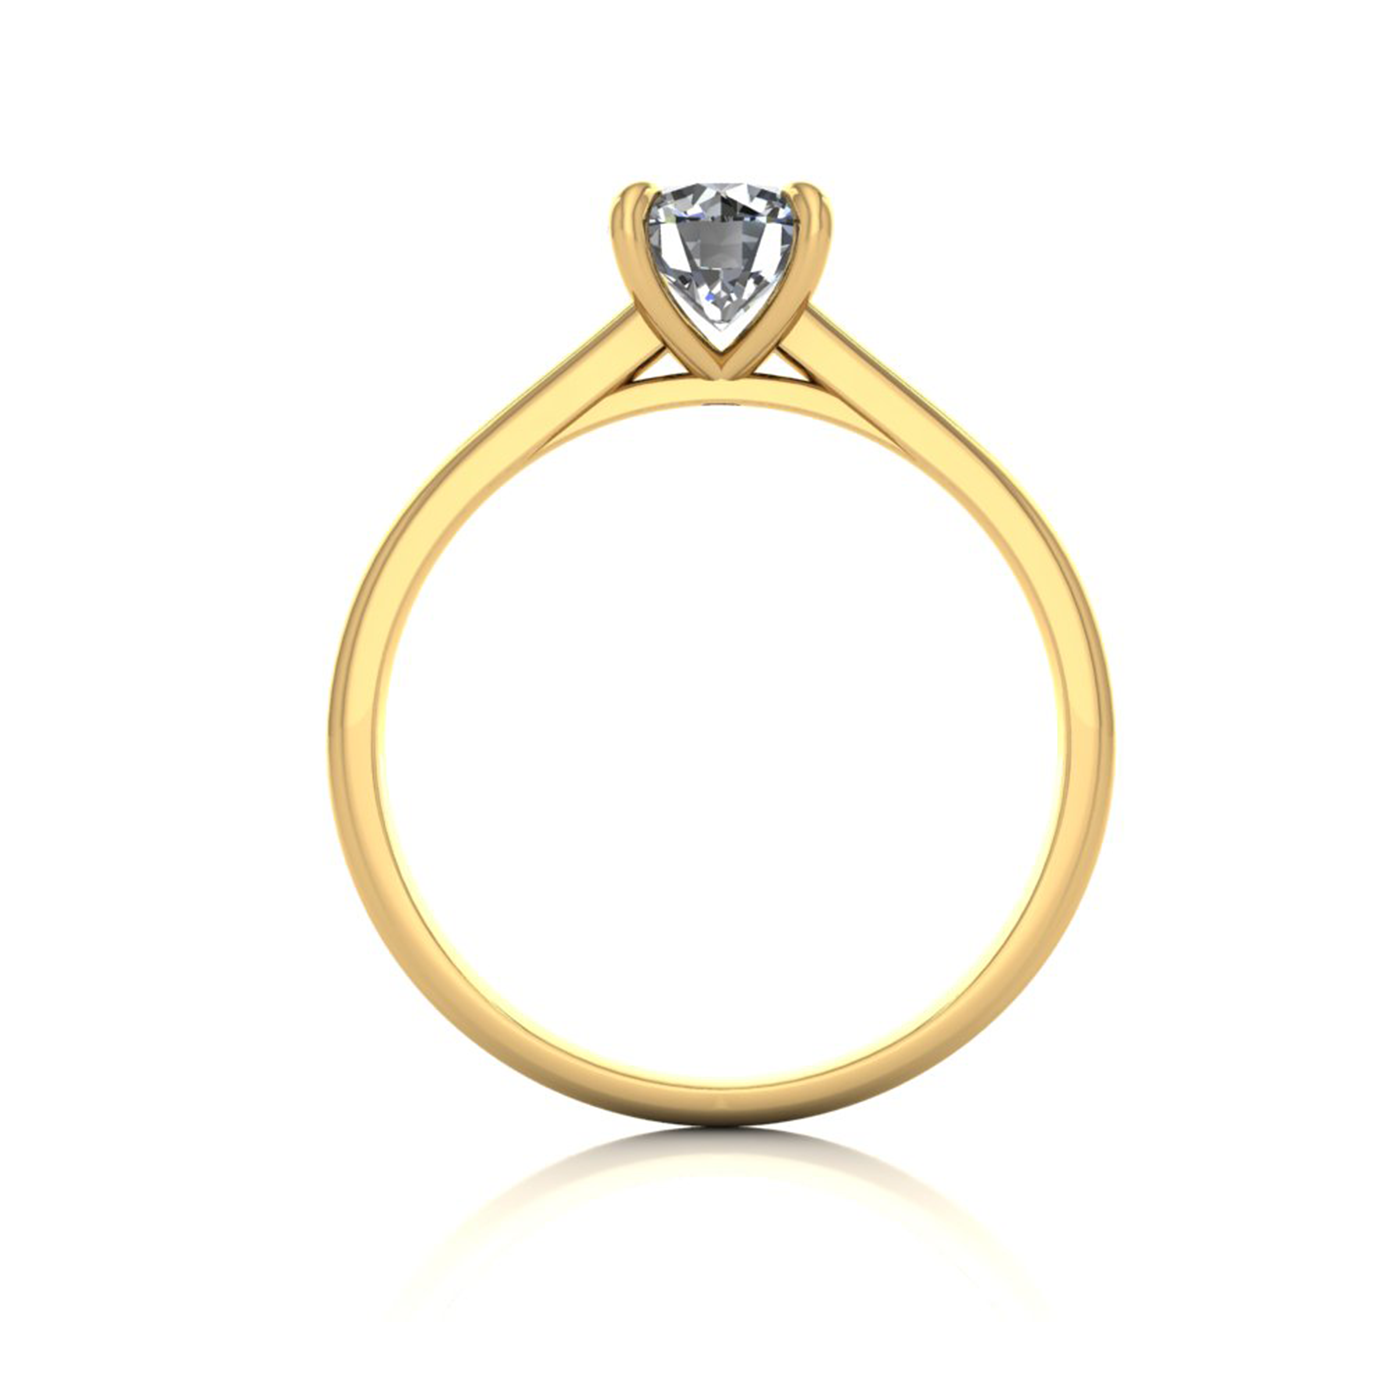 18k yellow gold 0,80 ct 4 prongs solitaire round cut diamond engagement ring with whisper thin band